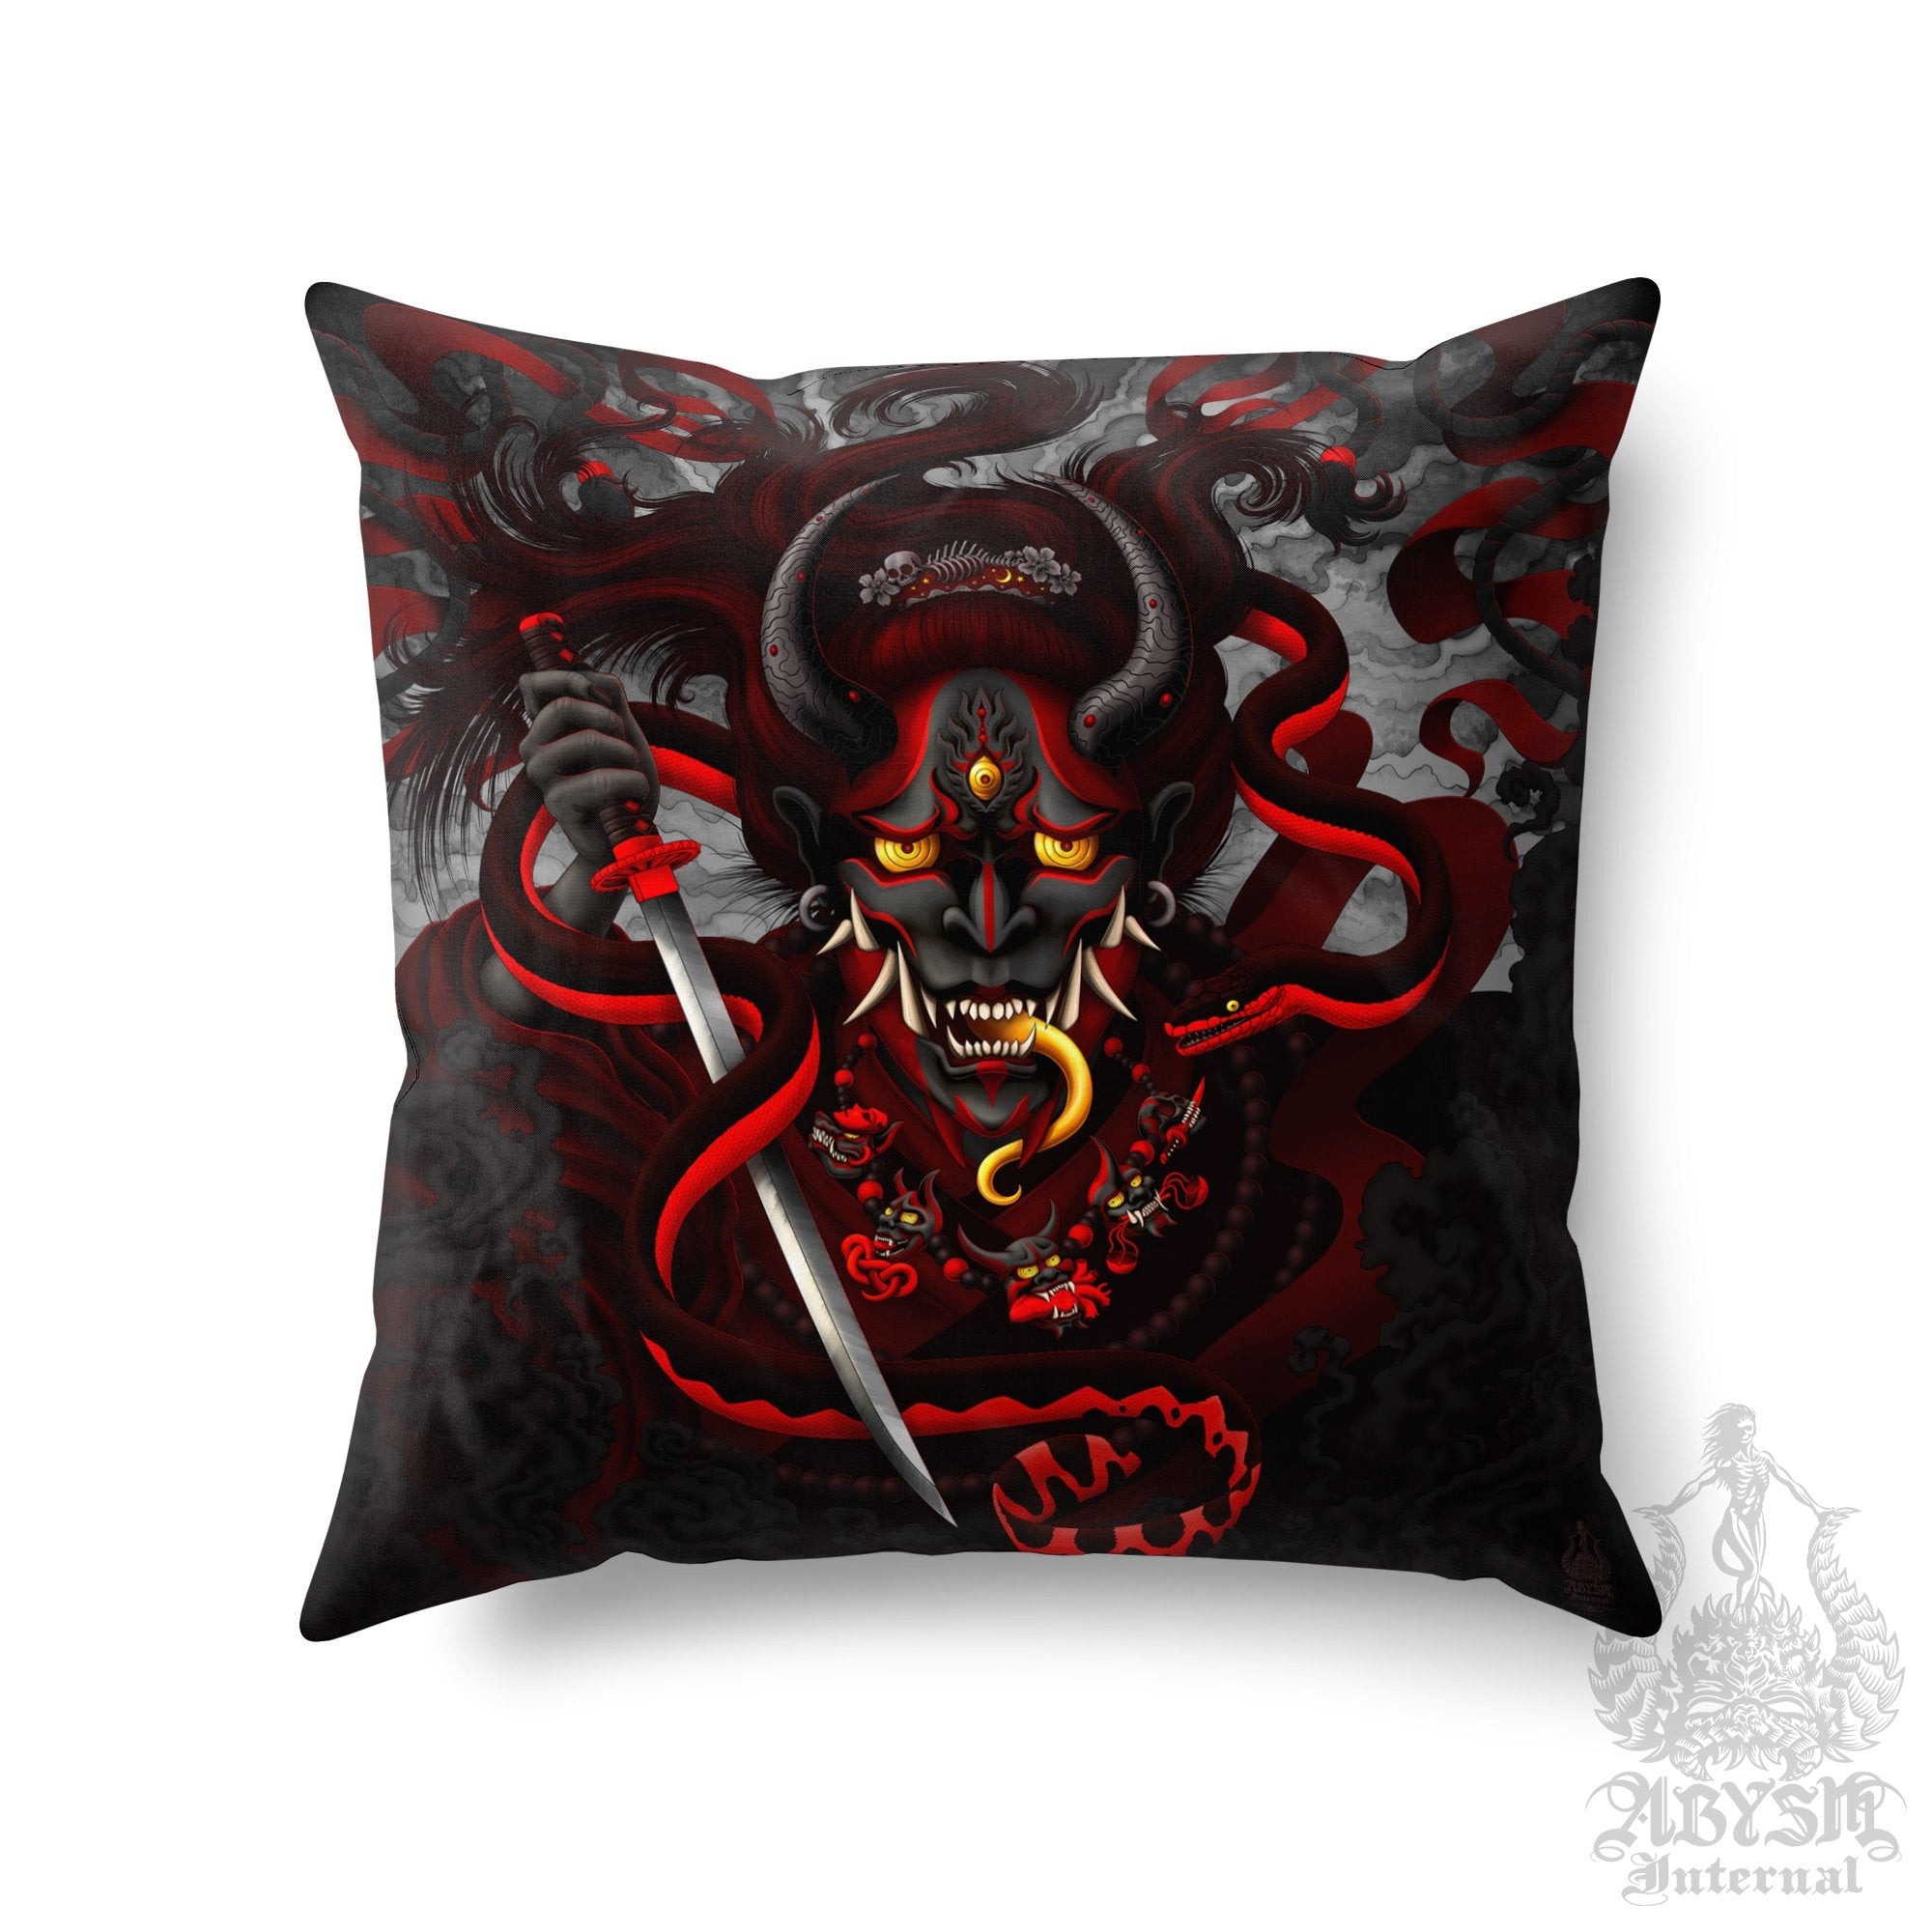 Black Hannya Throw Pillow, Decorative Accent Pillow, Square Cushion Cover, Japanese Demon & Red Snake, Goth Gamer Room Decor - Abysm Internal